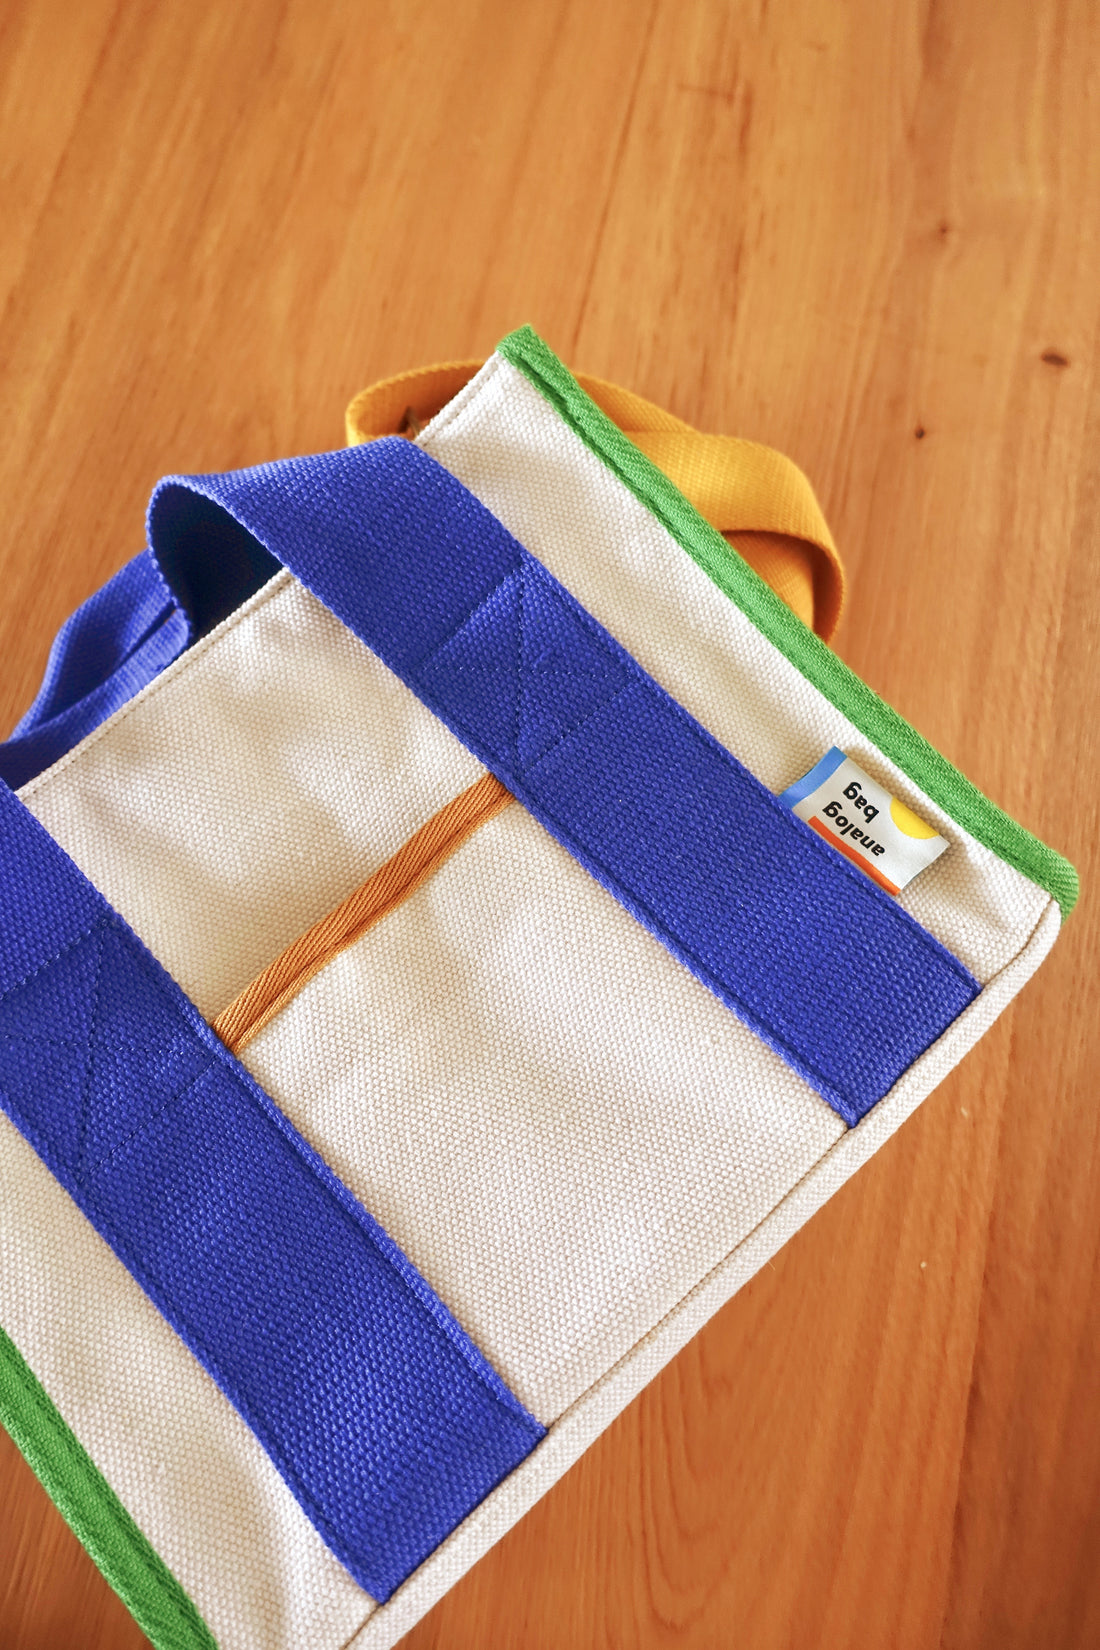 How to wash your canvas tote bags